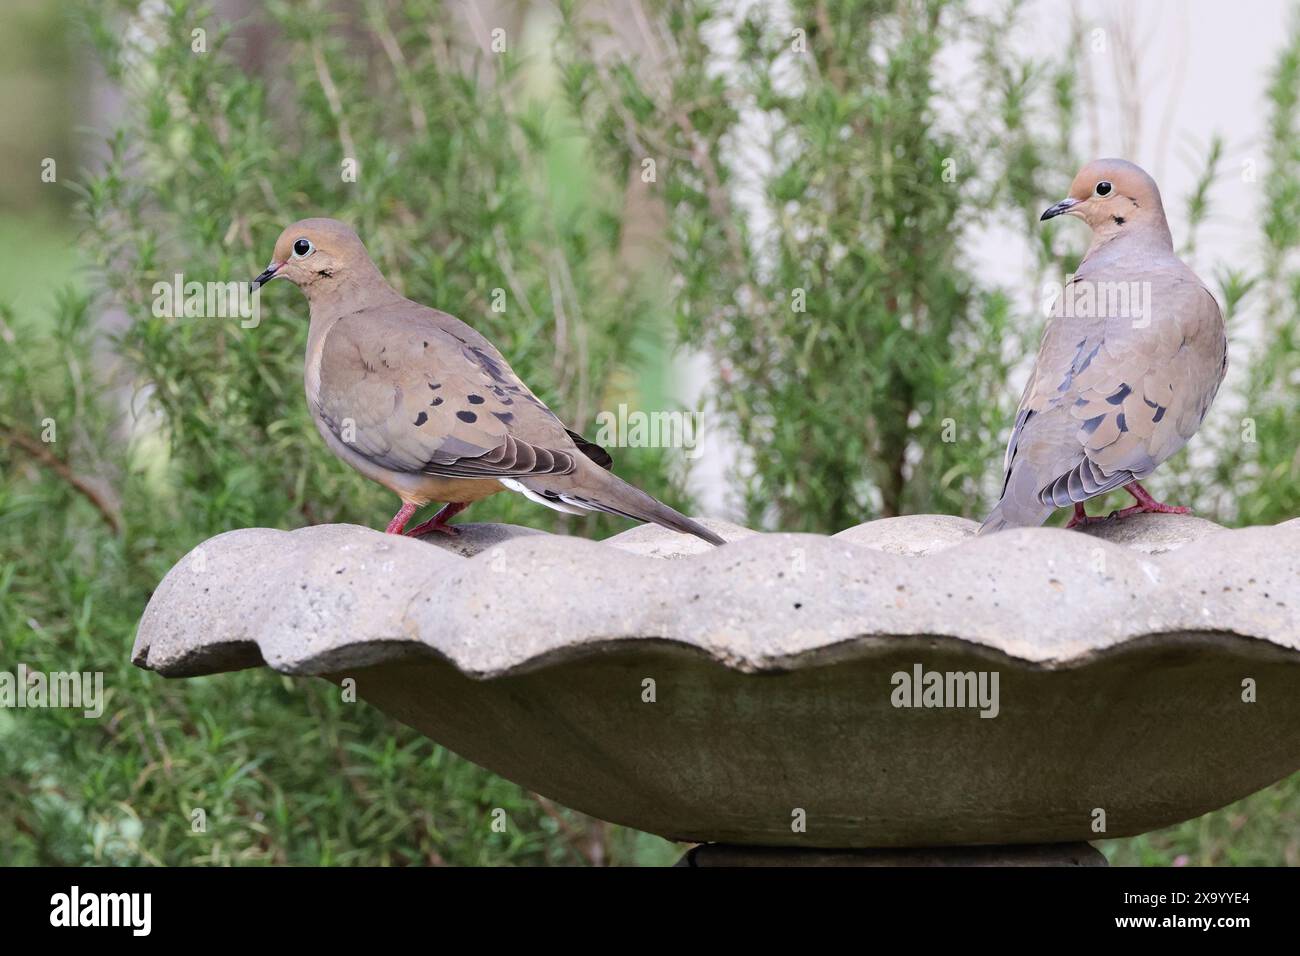 Two brown birds perched on a stone bird bath Stock Photo